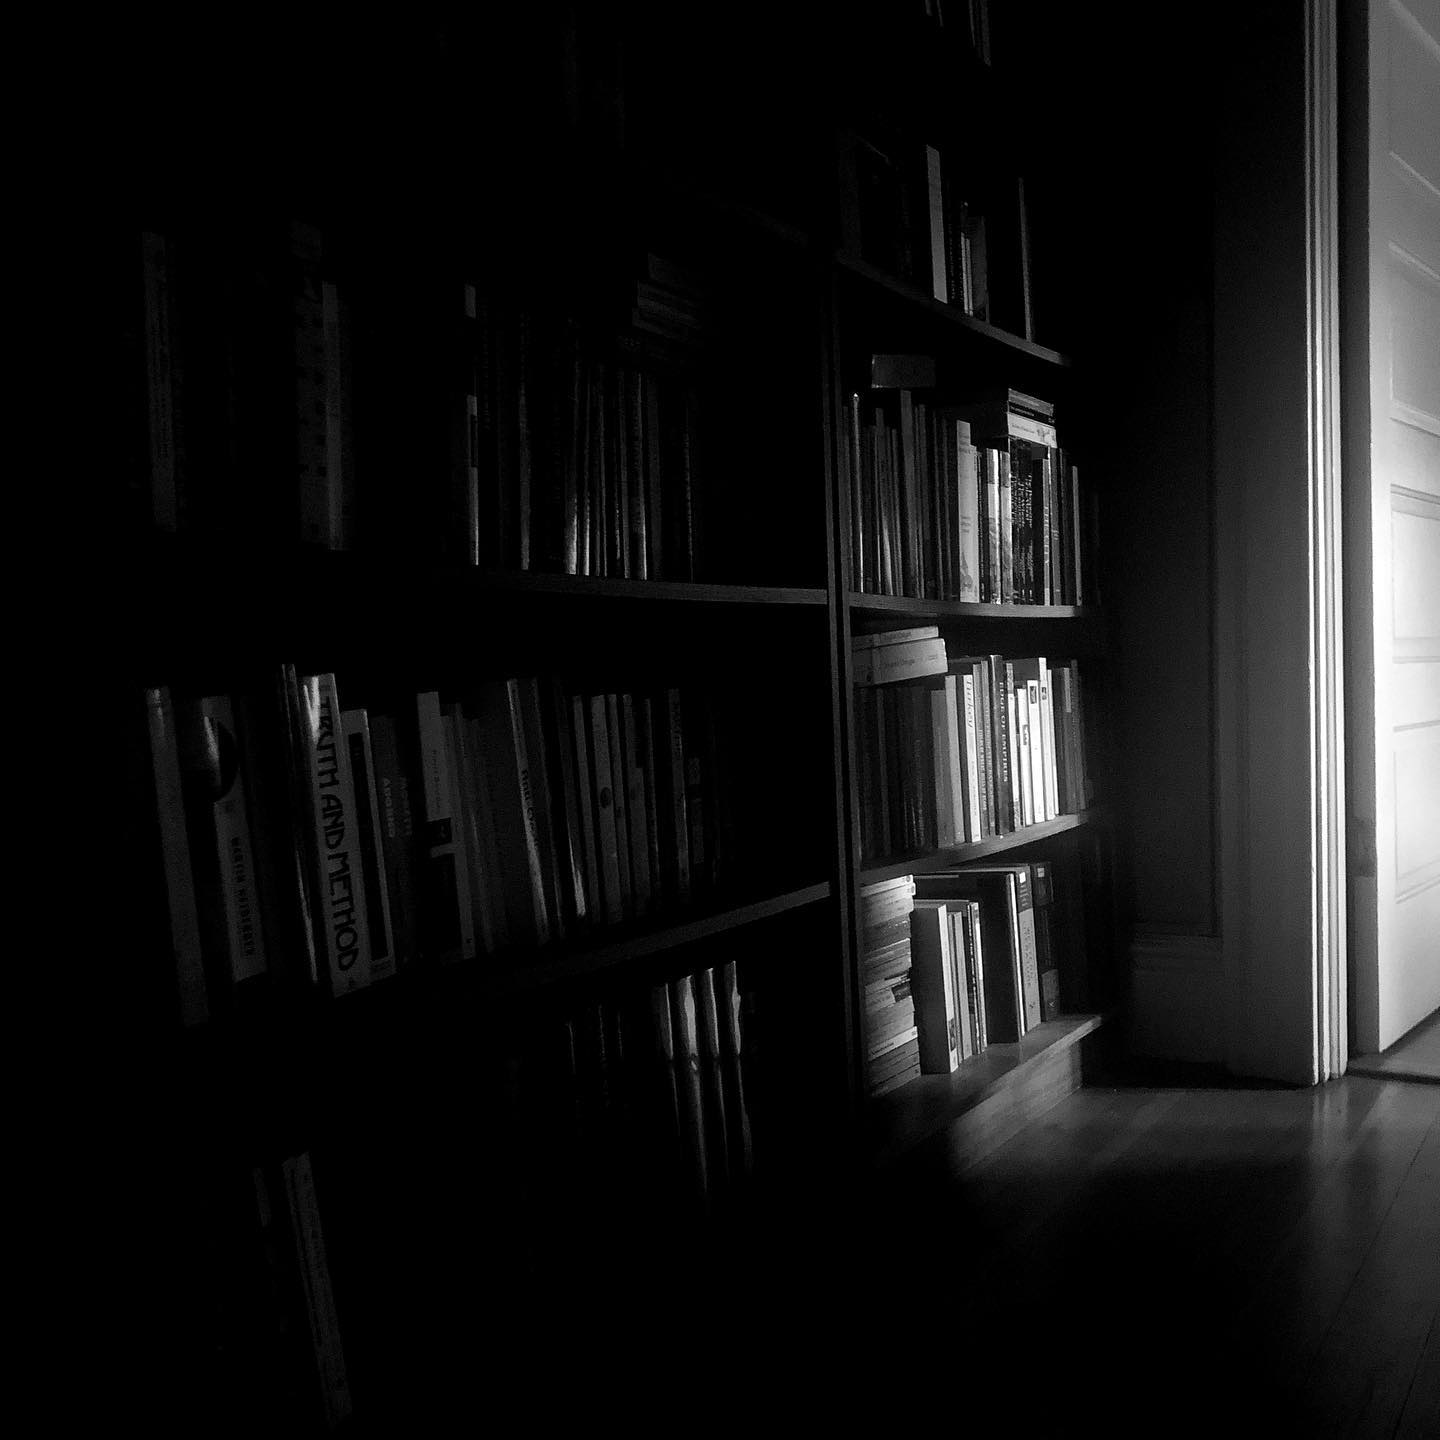 A dark photograph, in which books on shelves appear in a narrow band of light